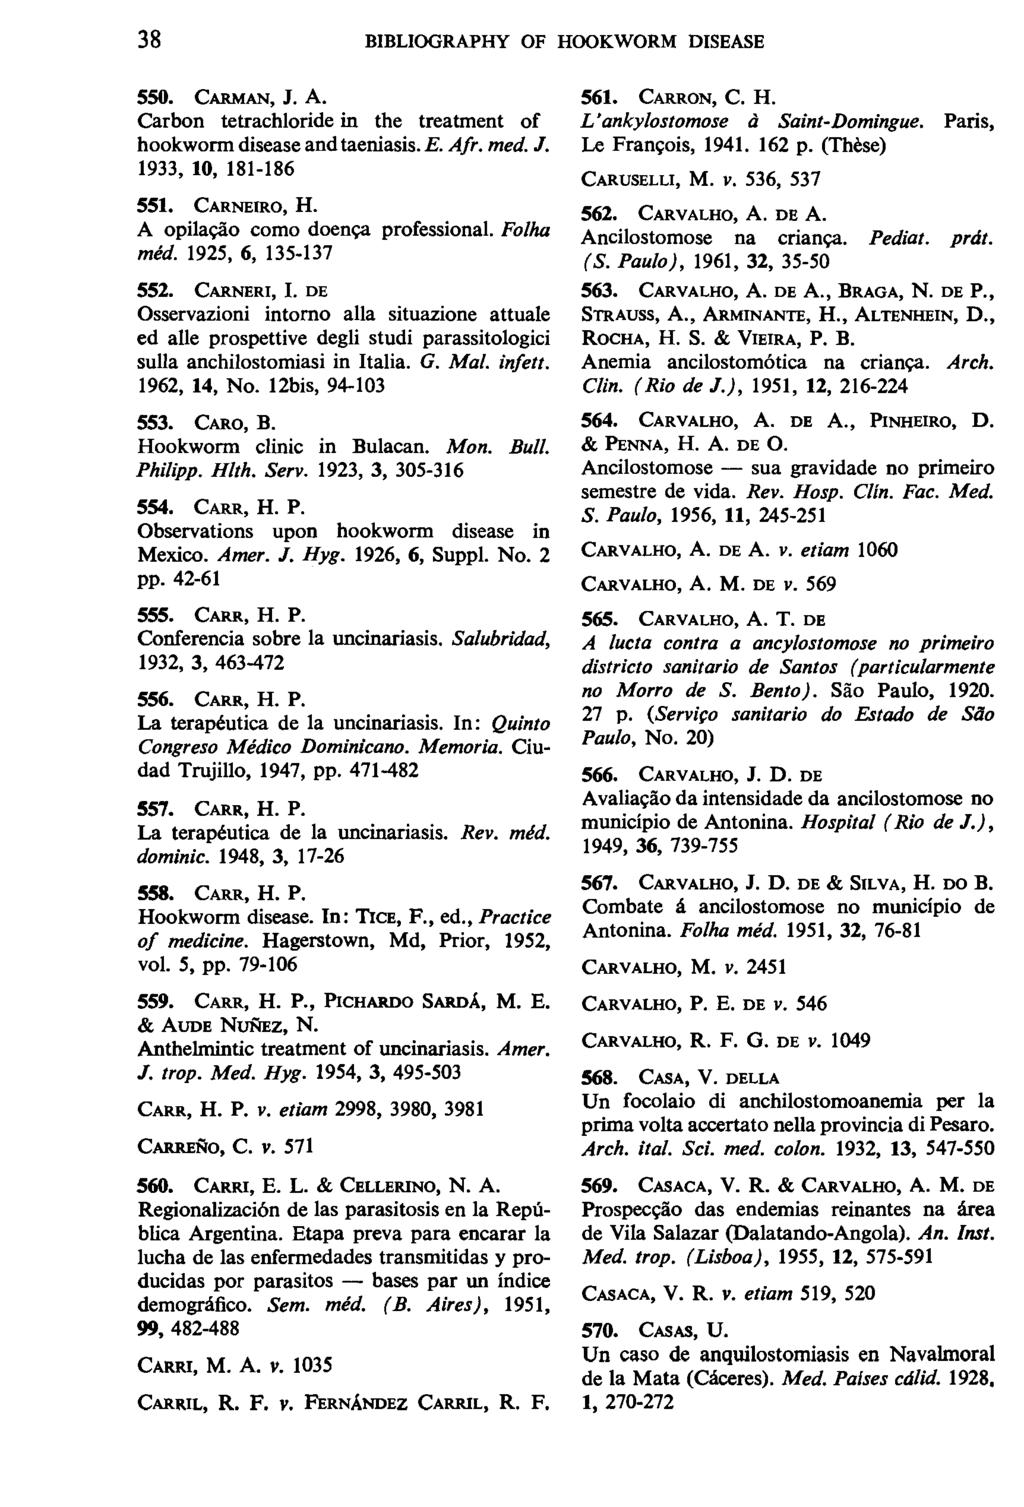 38 BIBLIOGRAPHY OF HOOKWORM DISEASE 550. CARMAN, J. A. Carbon tetrachloride in the treatment of hookworm disease and taeniasis. E. Afr. med. J. 1933, 10, 181-186 551. CARNEIRO, H.